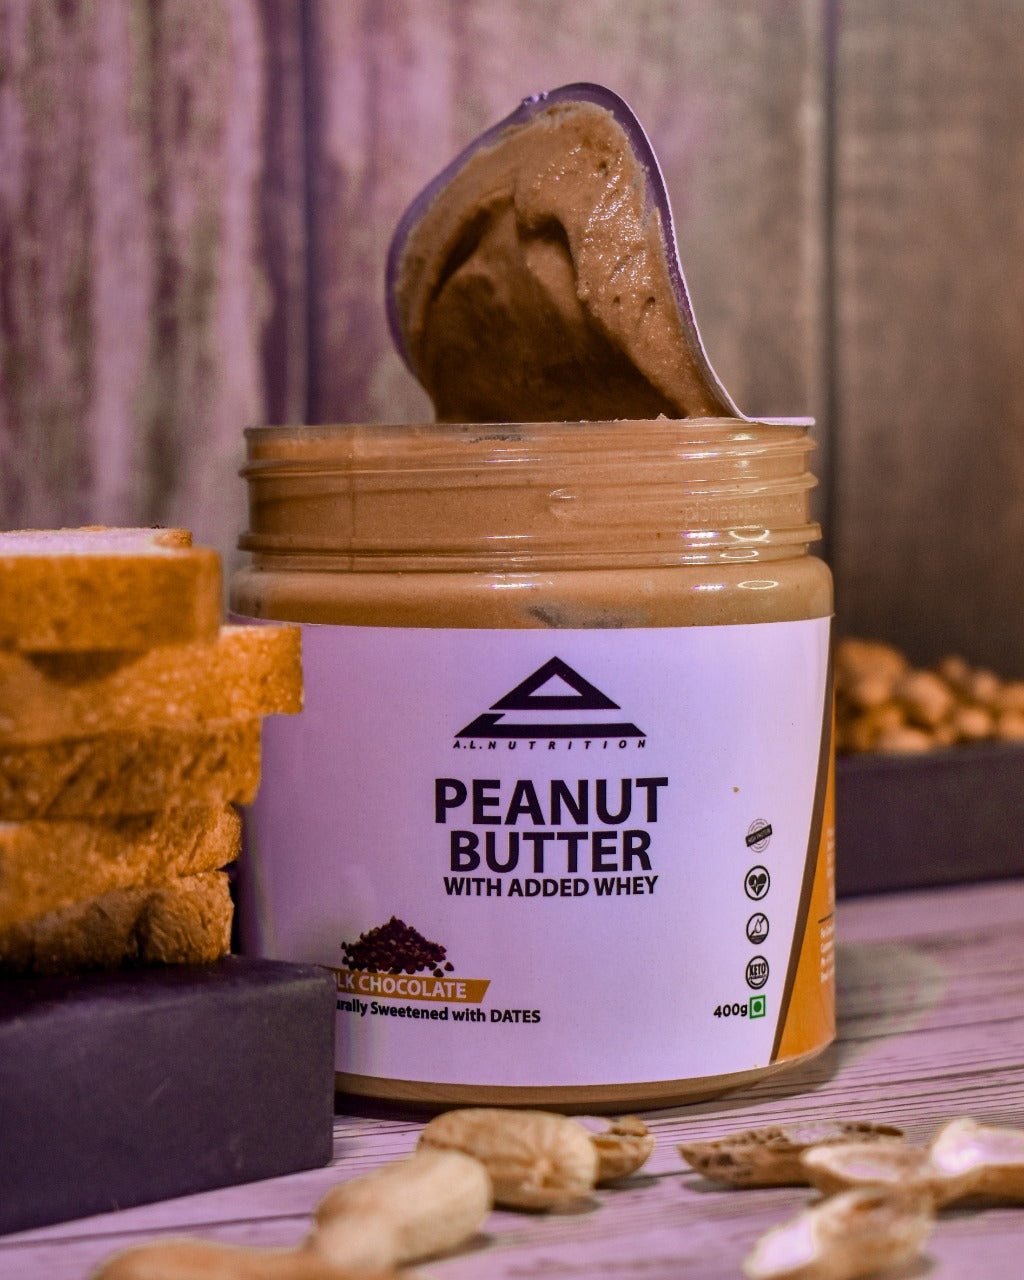 MILK CHOCOLATE PEANUT BUTTER WITH WHEY SWEETENED WITH DATES